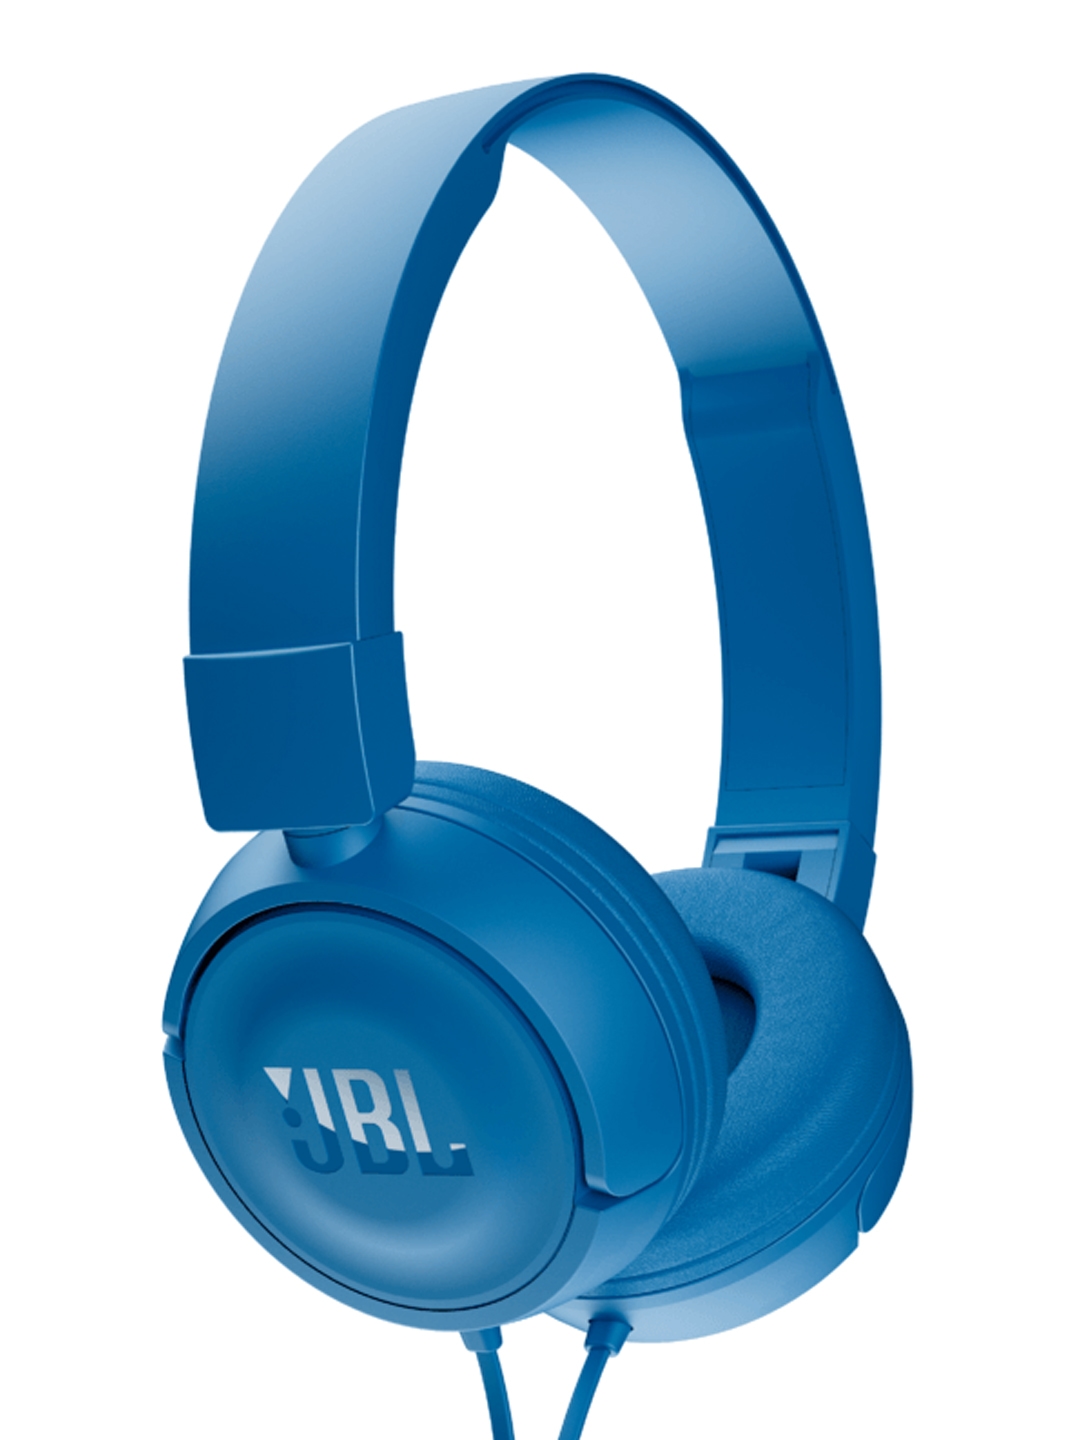 For 999/-(60% Off) JBL T450 Blue Unisex Headphones with Mic at Myntra